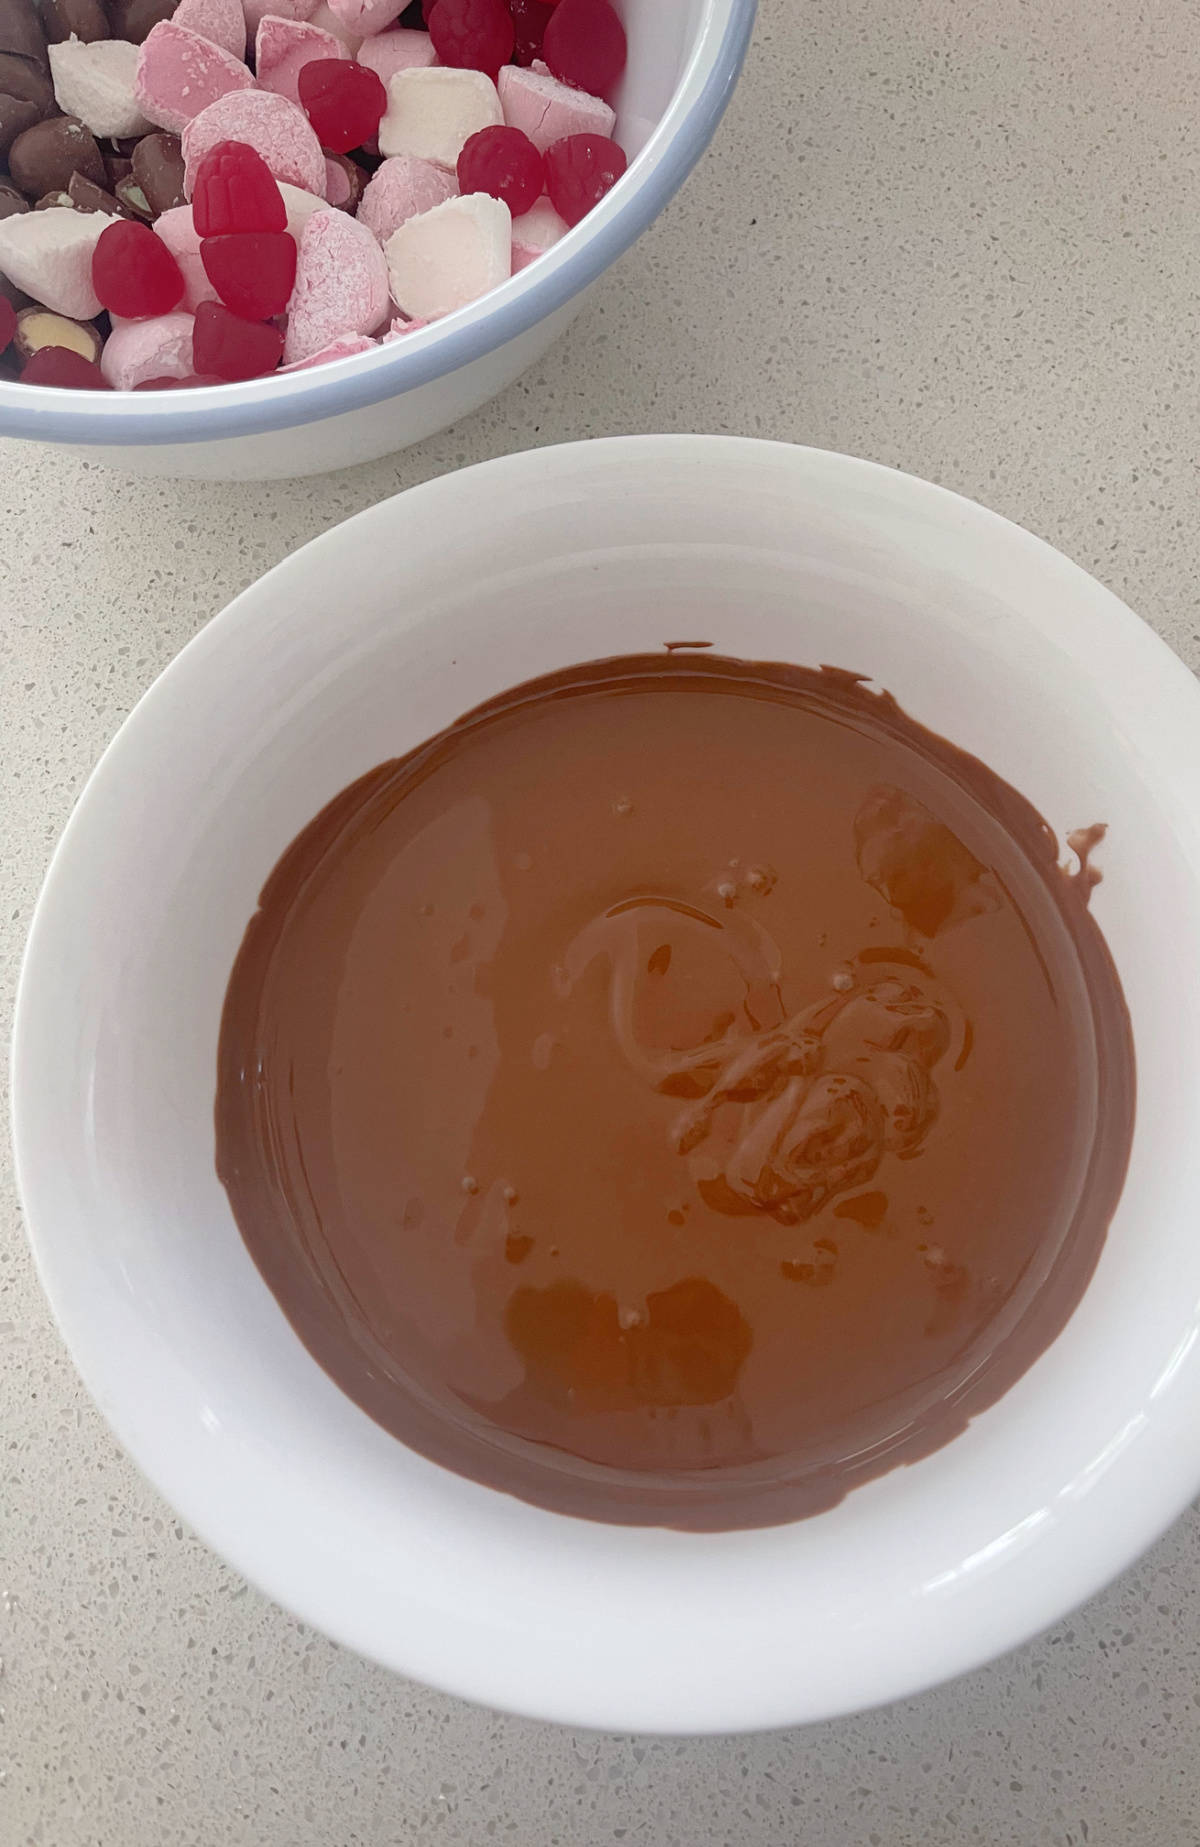 Melted milk chocolate in a white bowl. In the background is a bowl filled with ingredients to make clinkers rocky road.